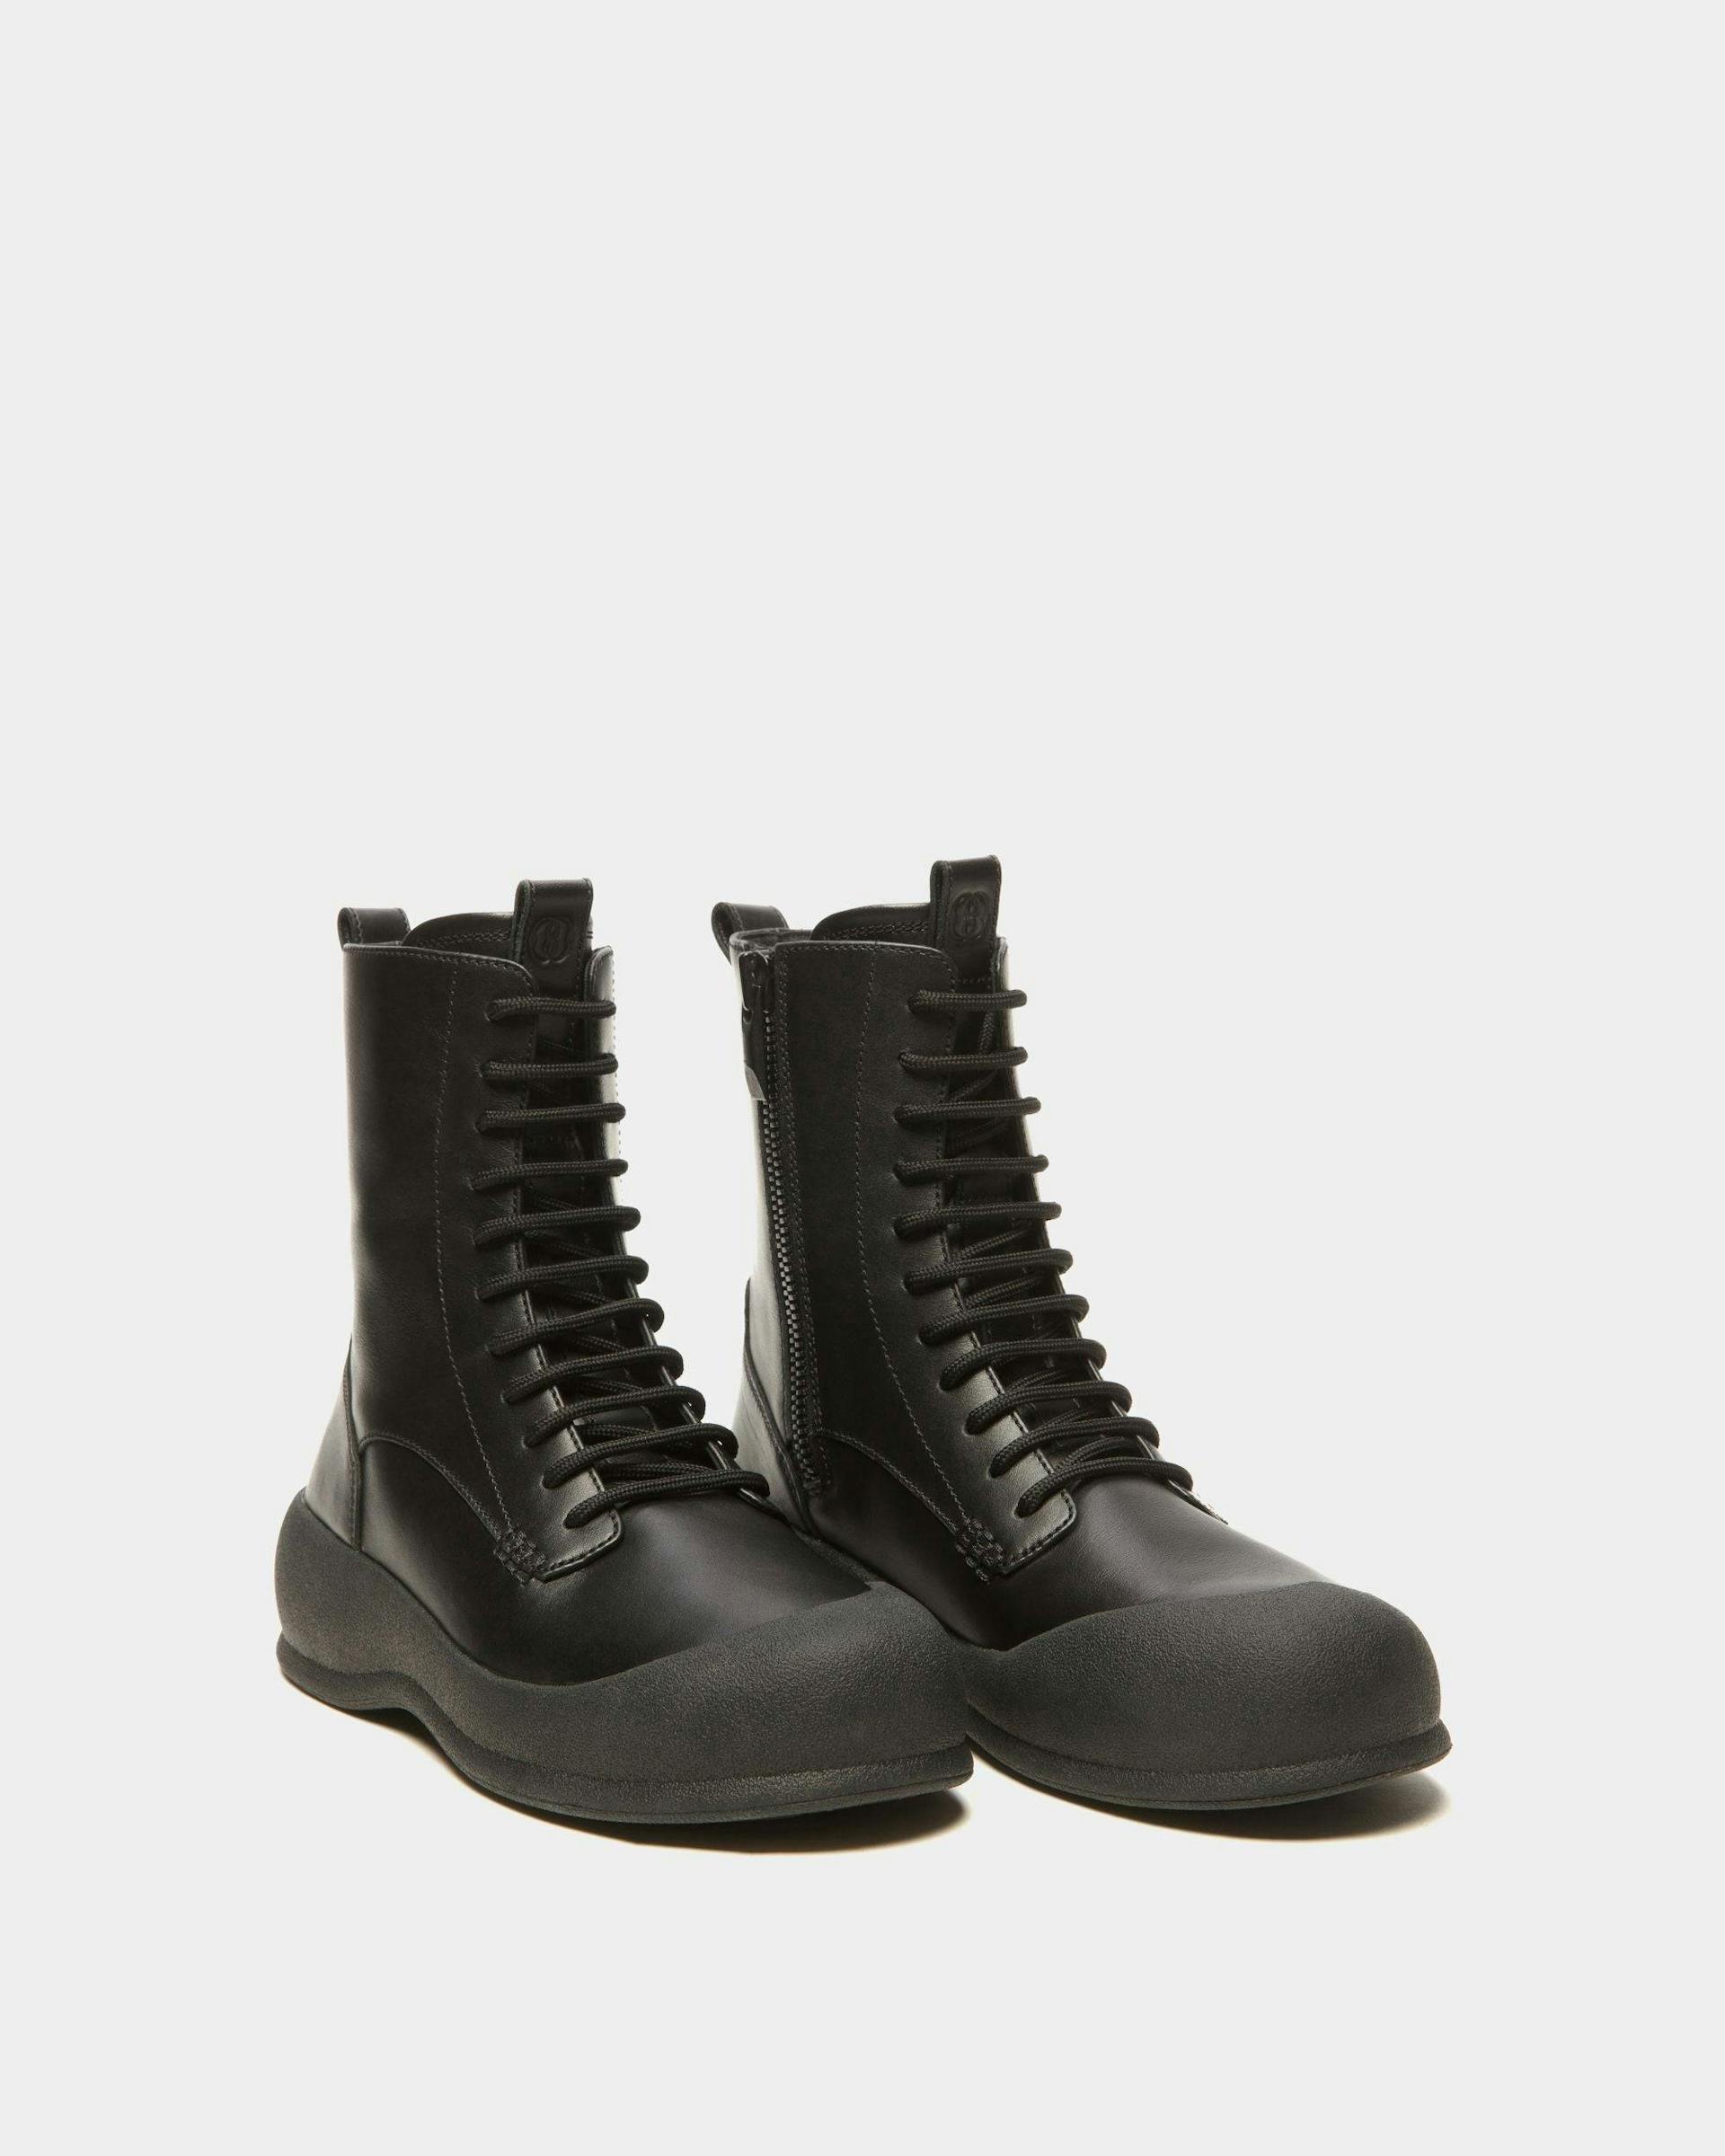 Women's Frei Boots In Black Leather | Bally | Still Life 3/4 Front